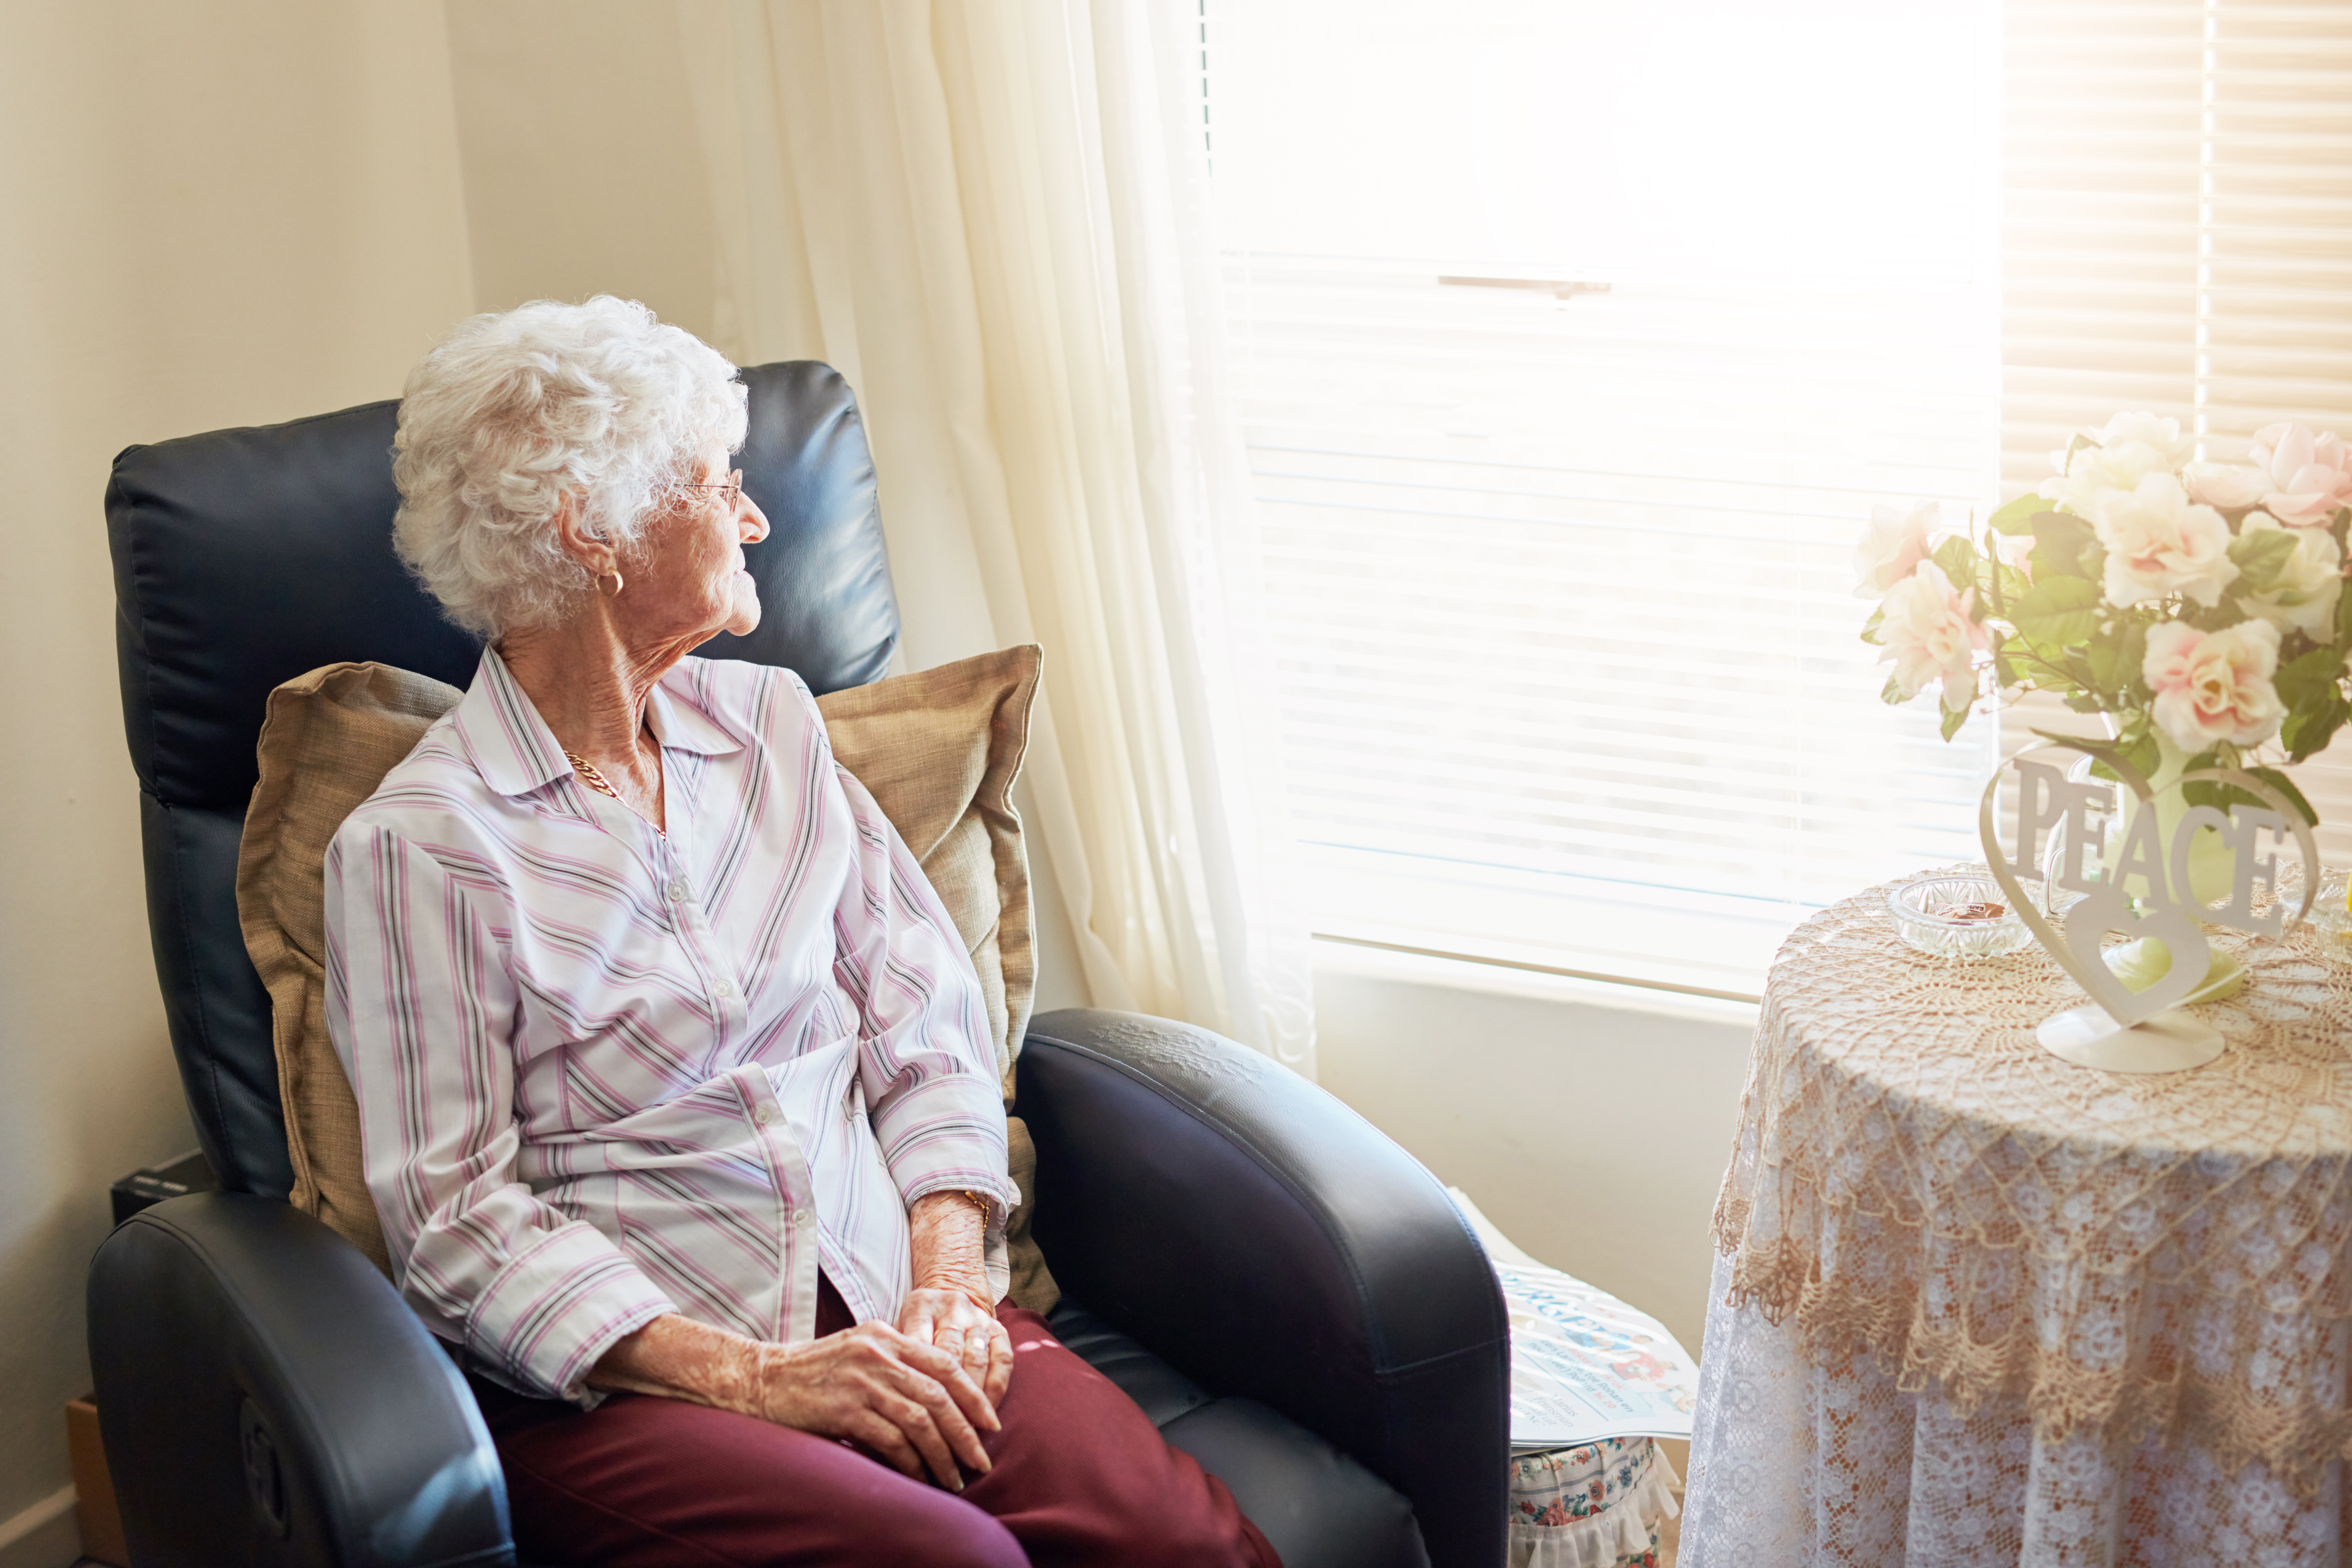 How To Ensure Home Security for Seniors Living Alone